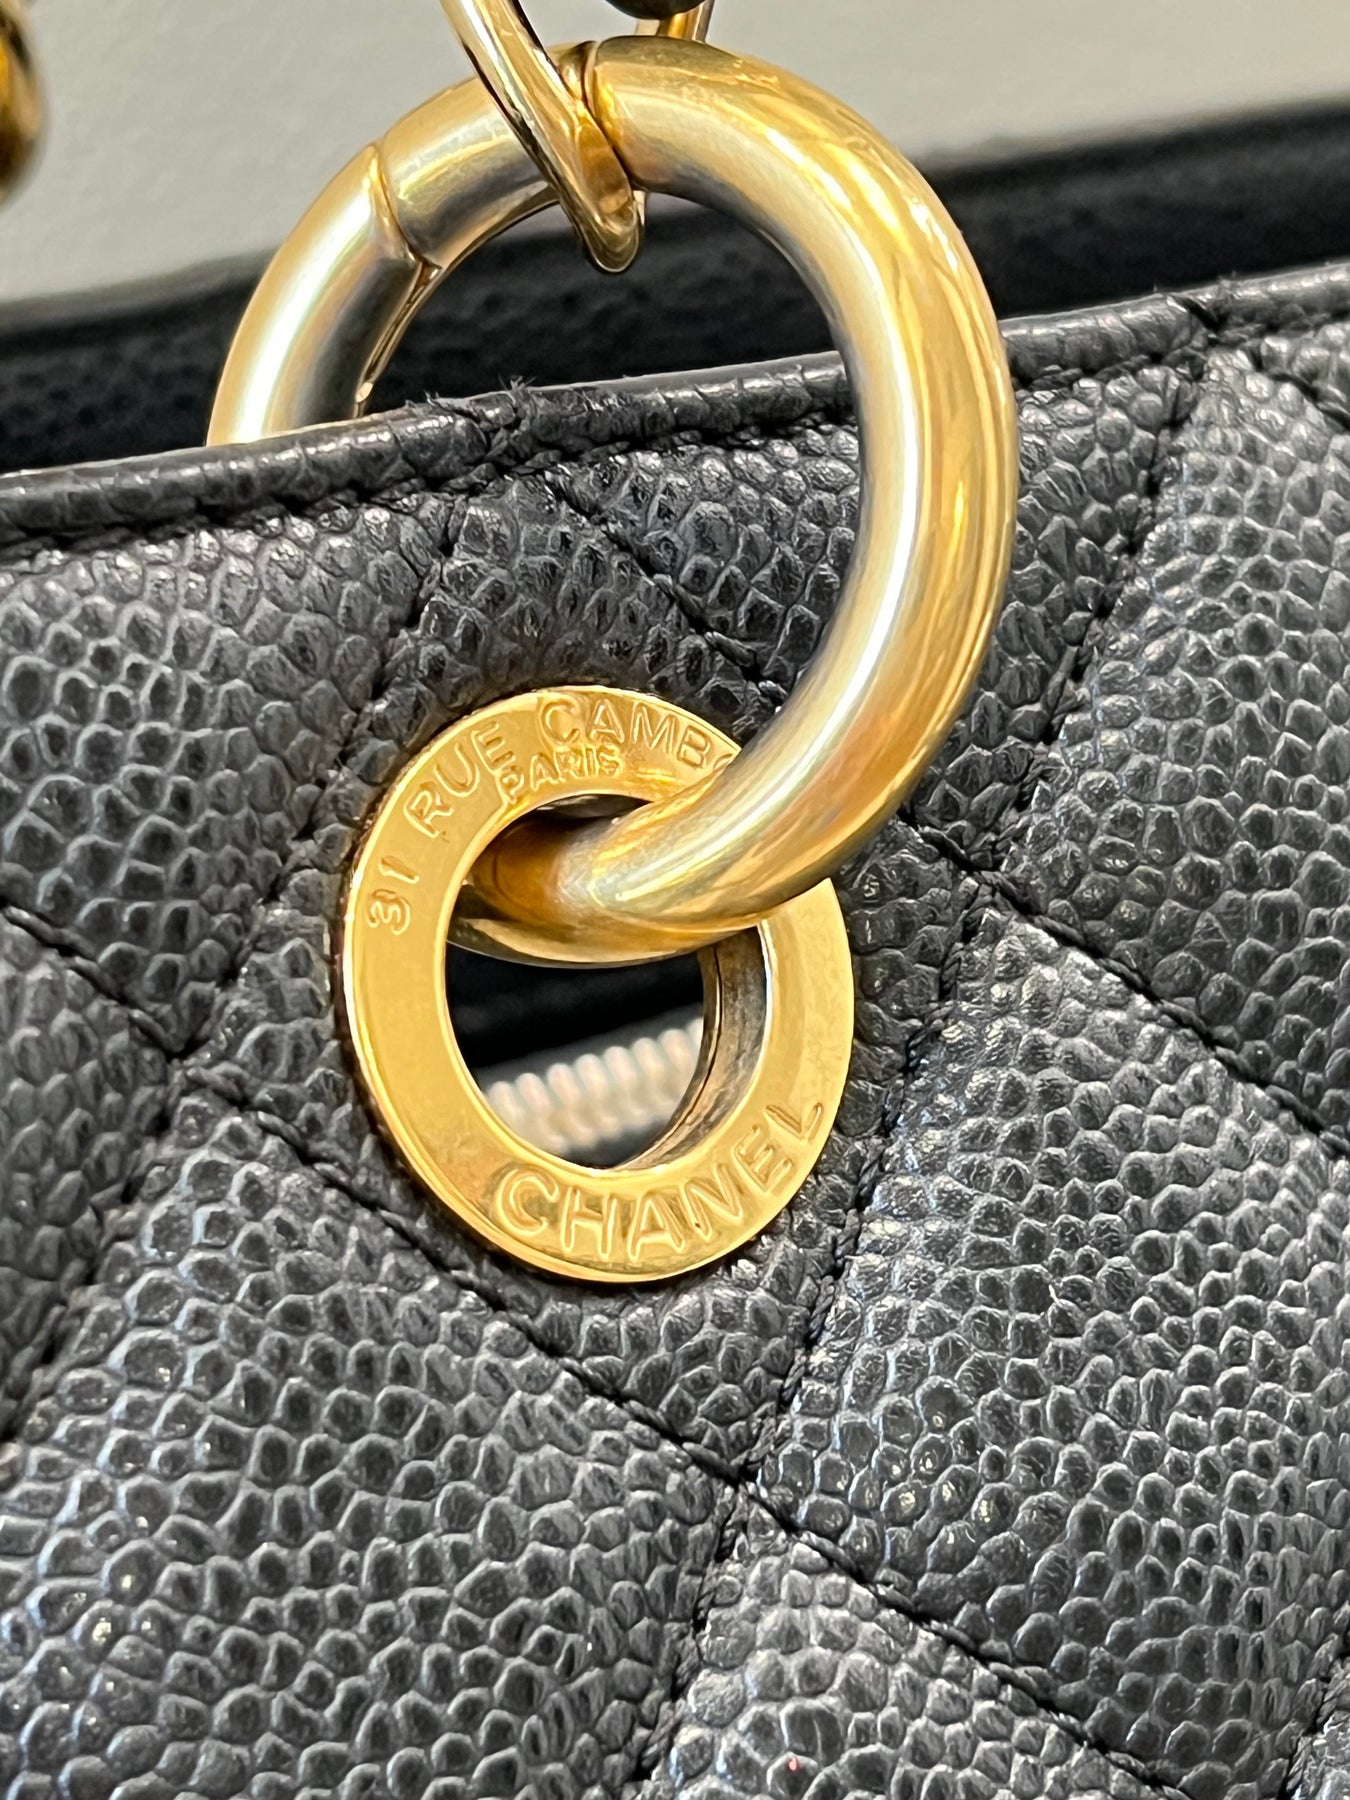 CHANEL CAVIAR QUILTED GRAND SHOPPING TOTE BAG – Caroline's Fashion Luxuries